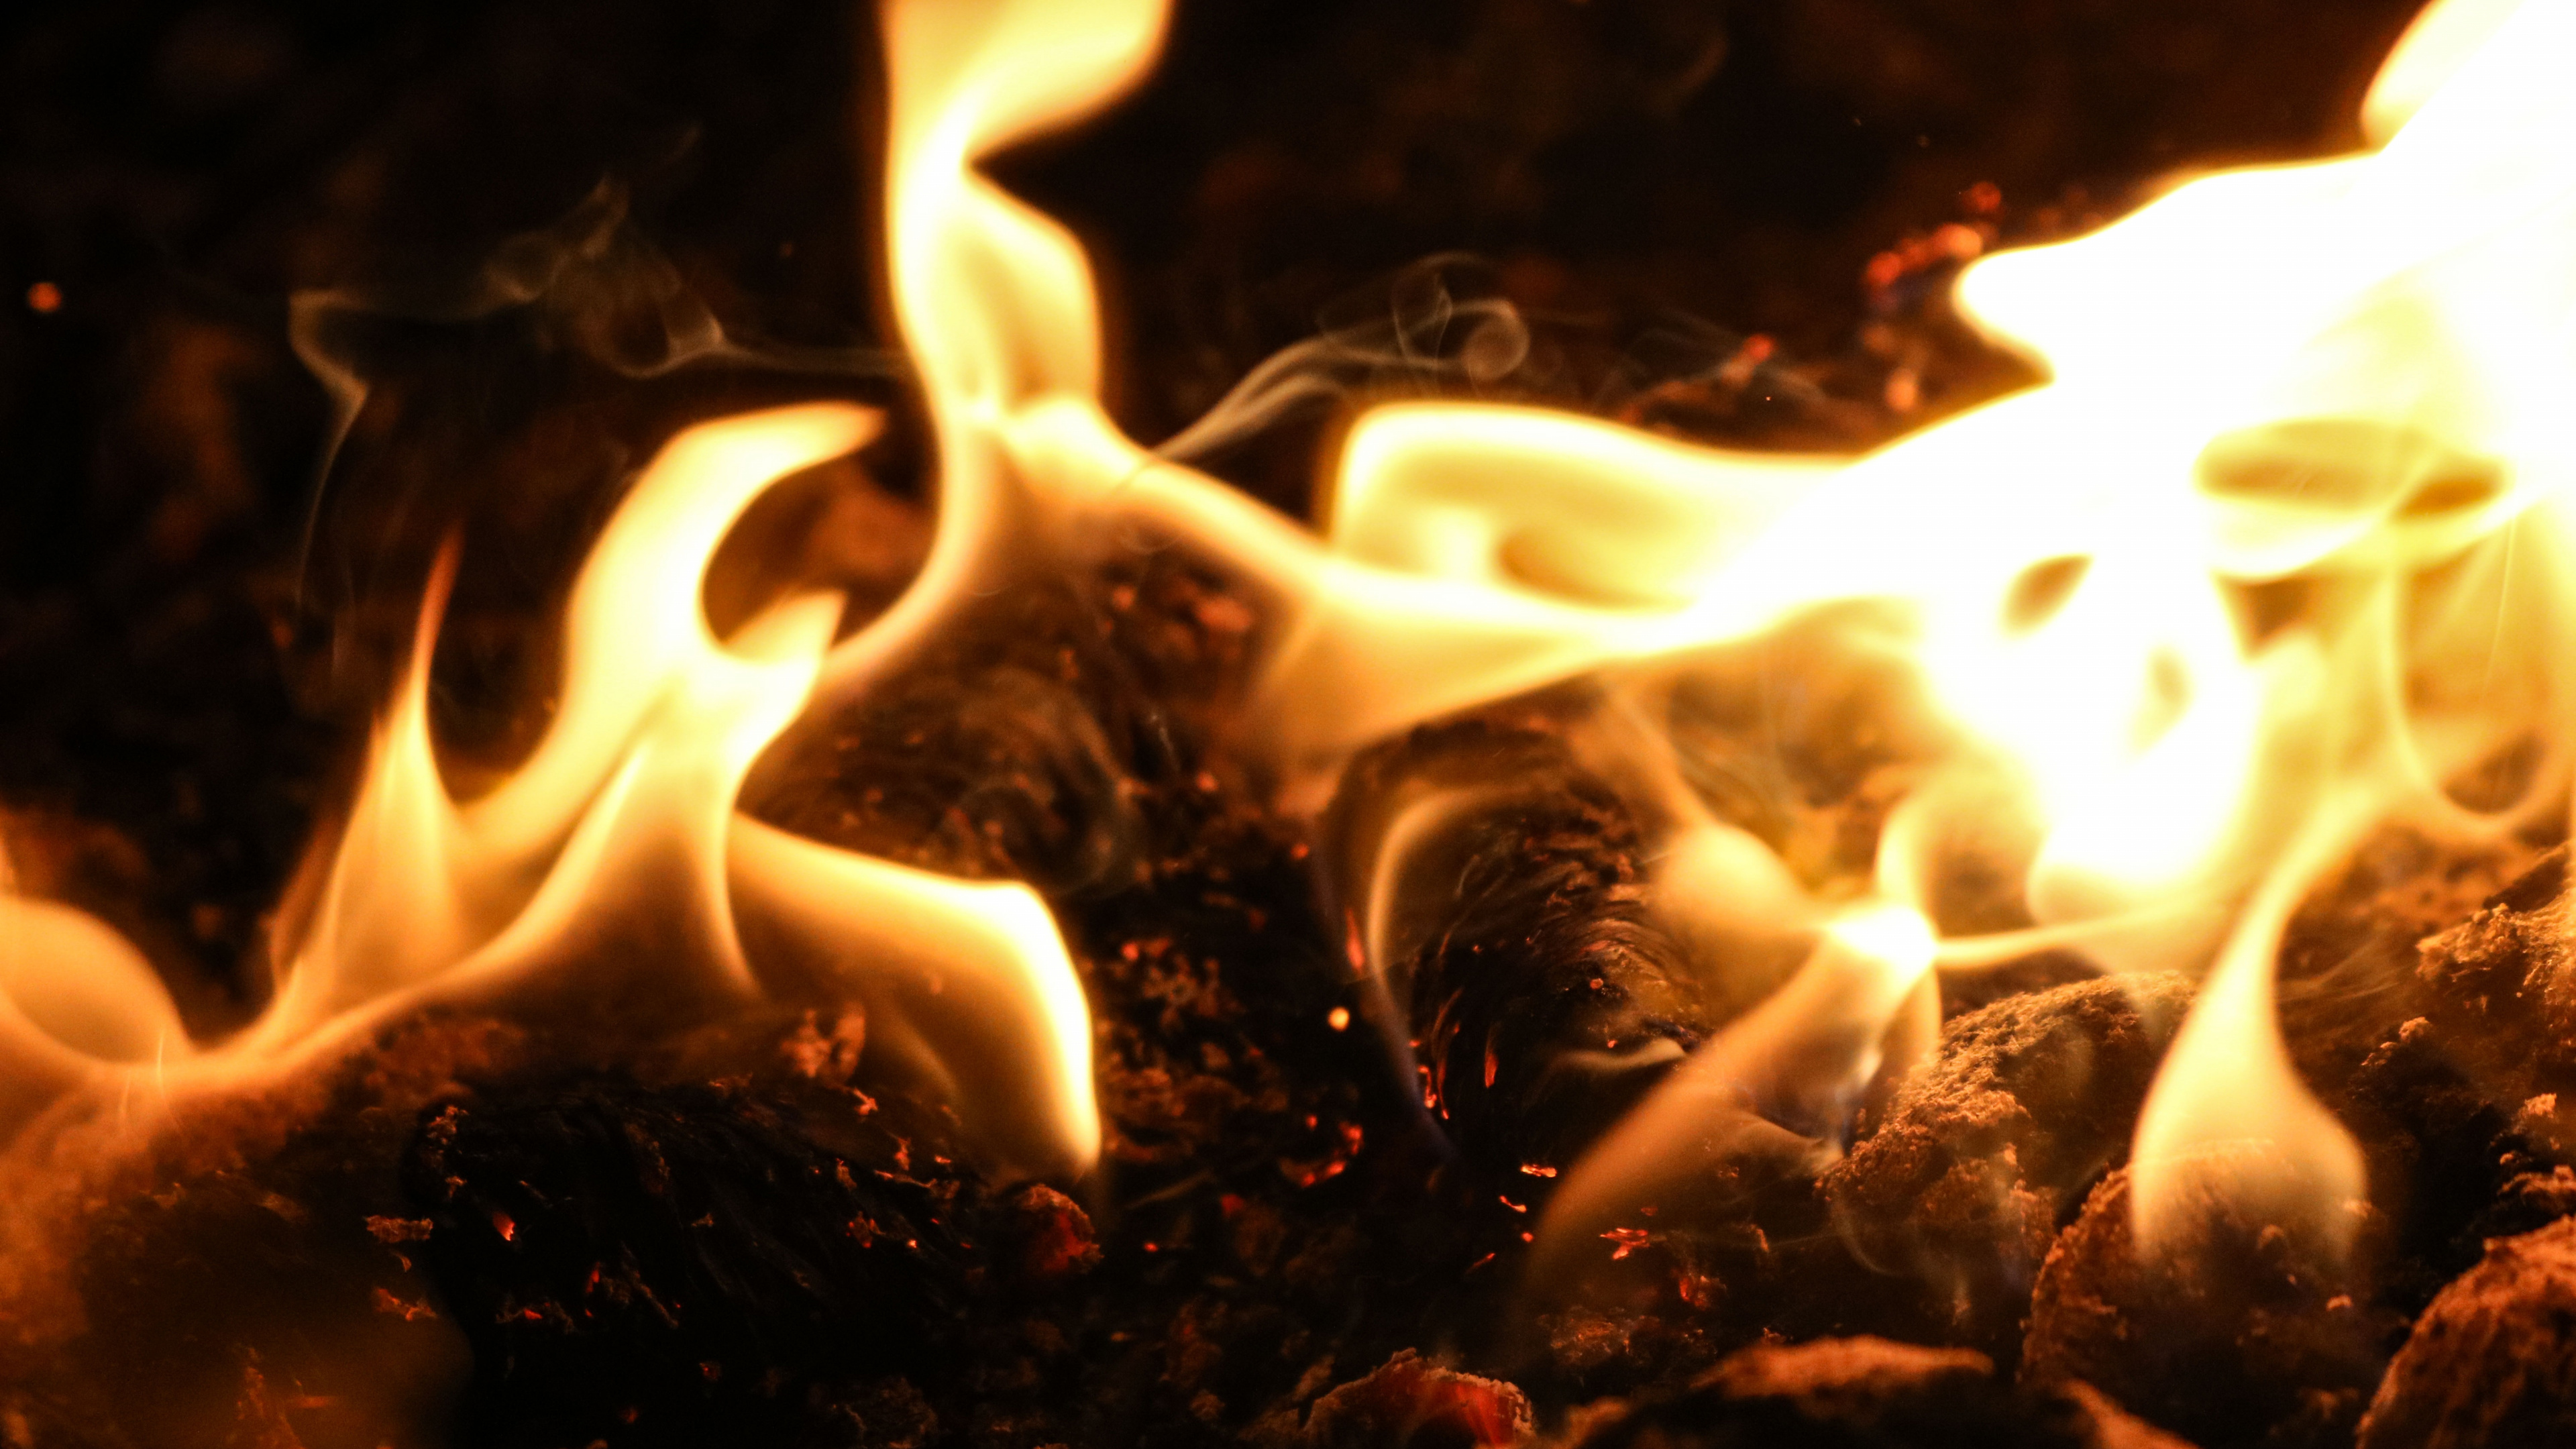 Fire in The Dark During Night Time. Wallpaper in 3840x2160 Resolution